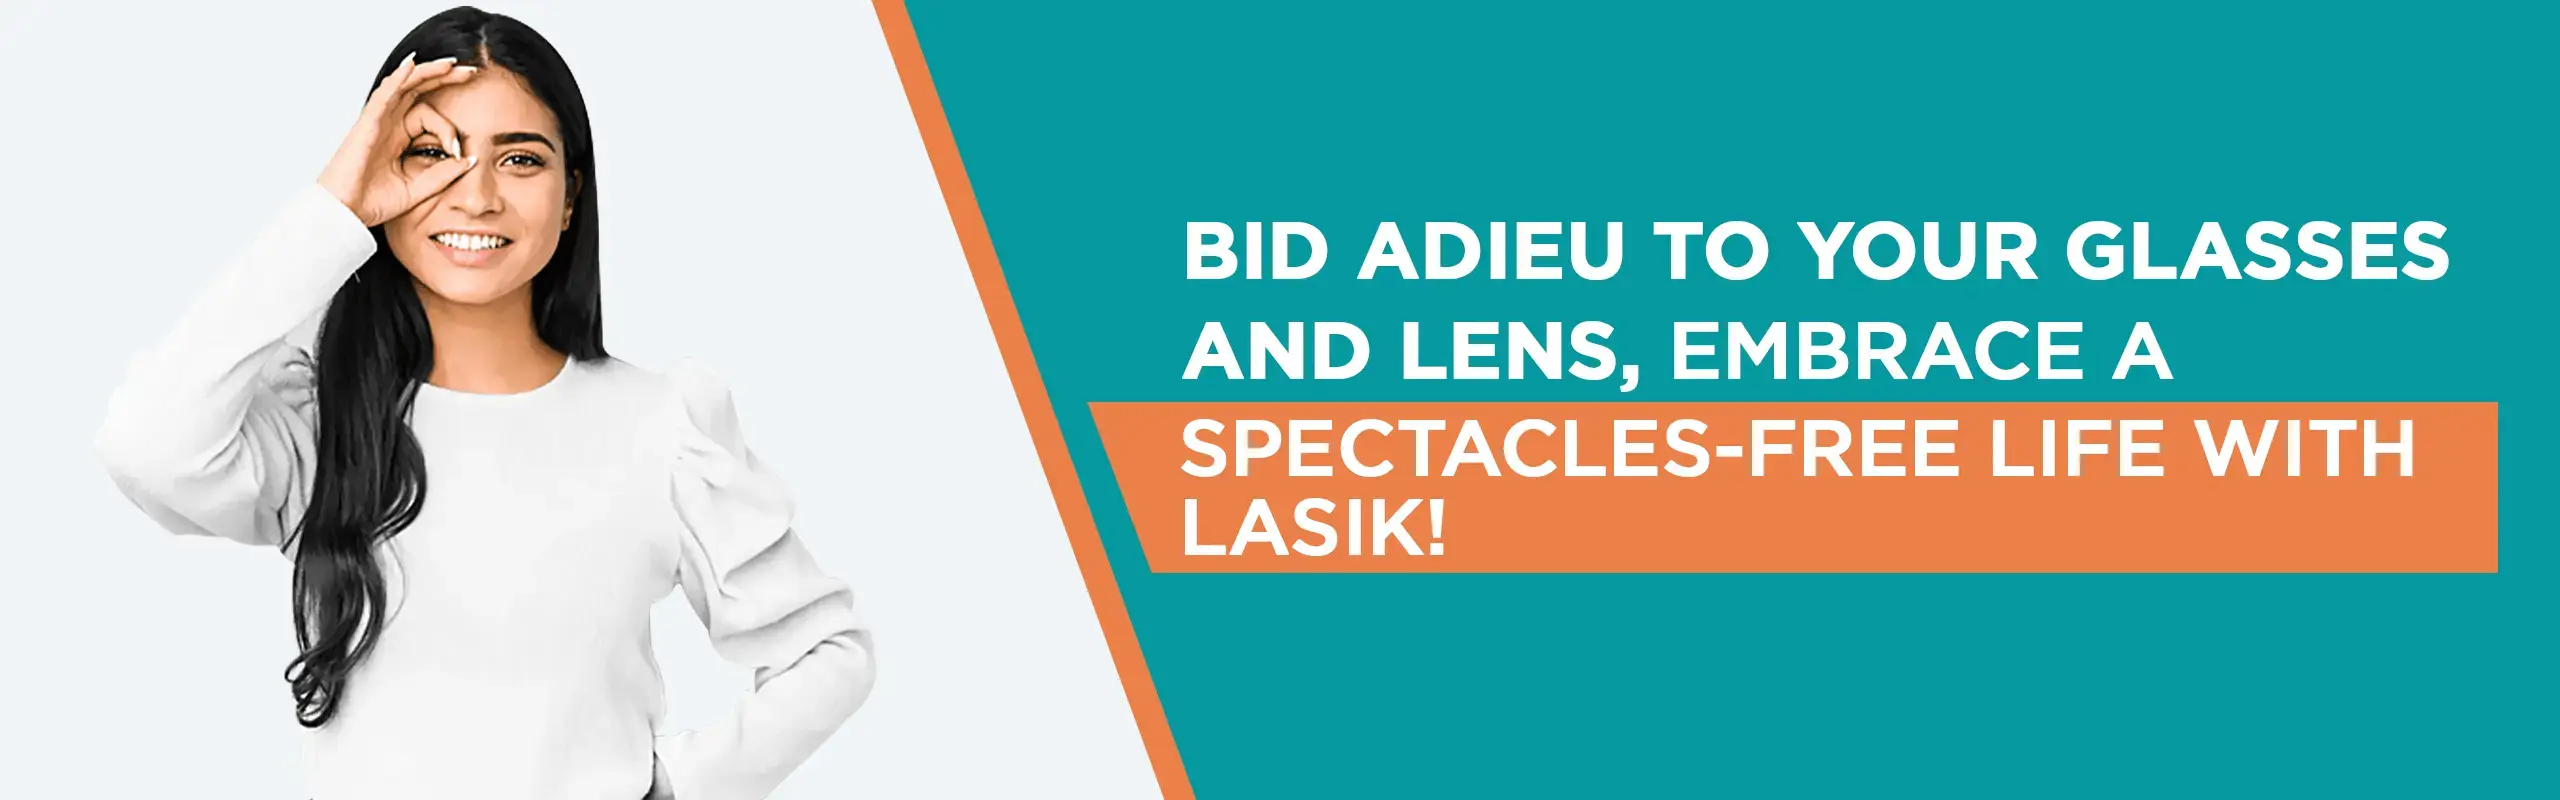 Bid adieu to your glasses and lens, embrace a spectacles-free life with LASIK!